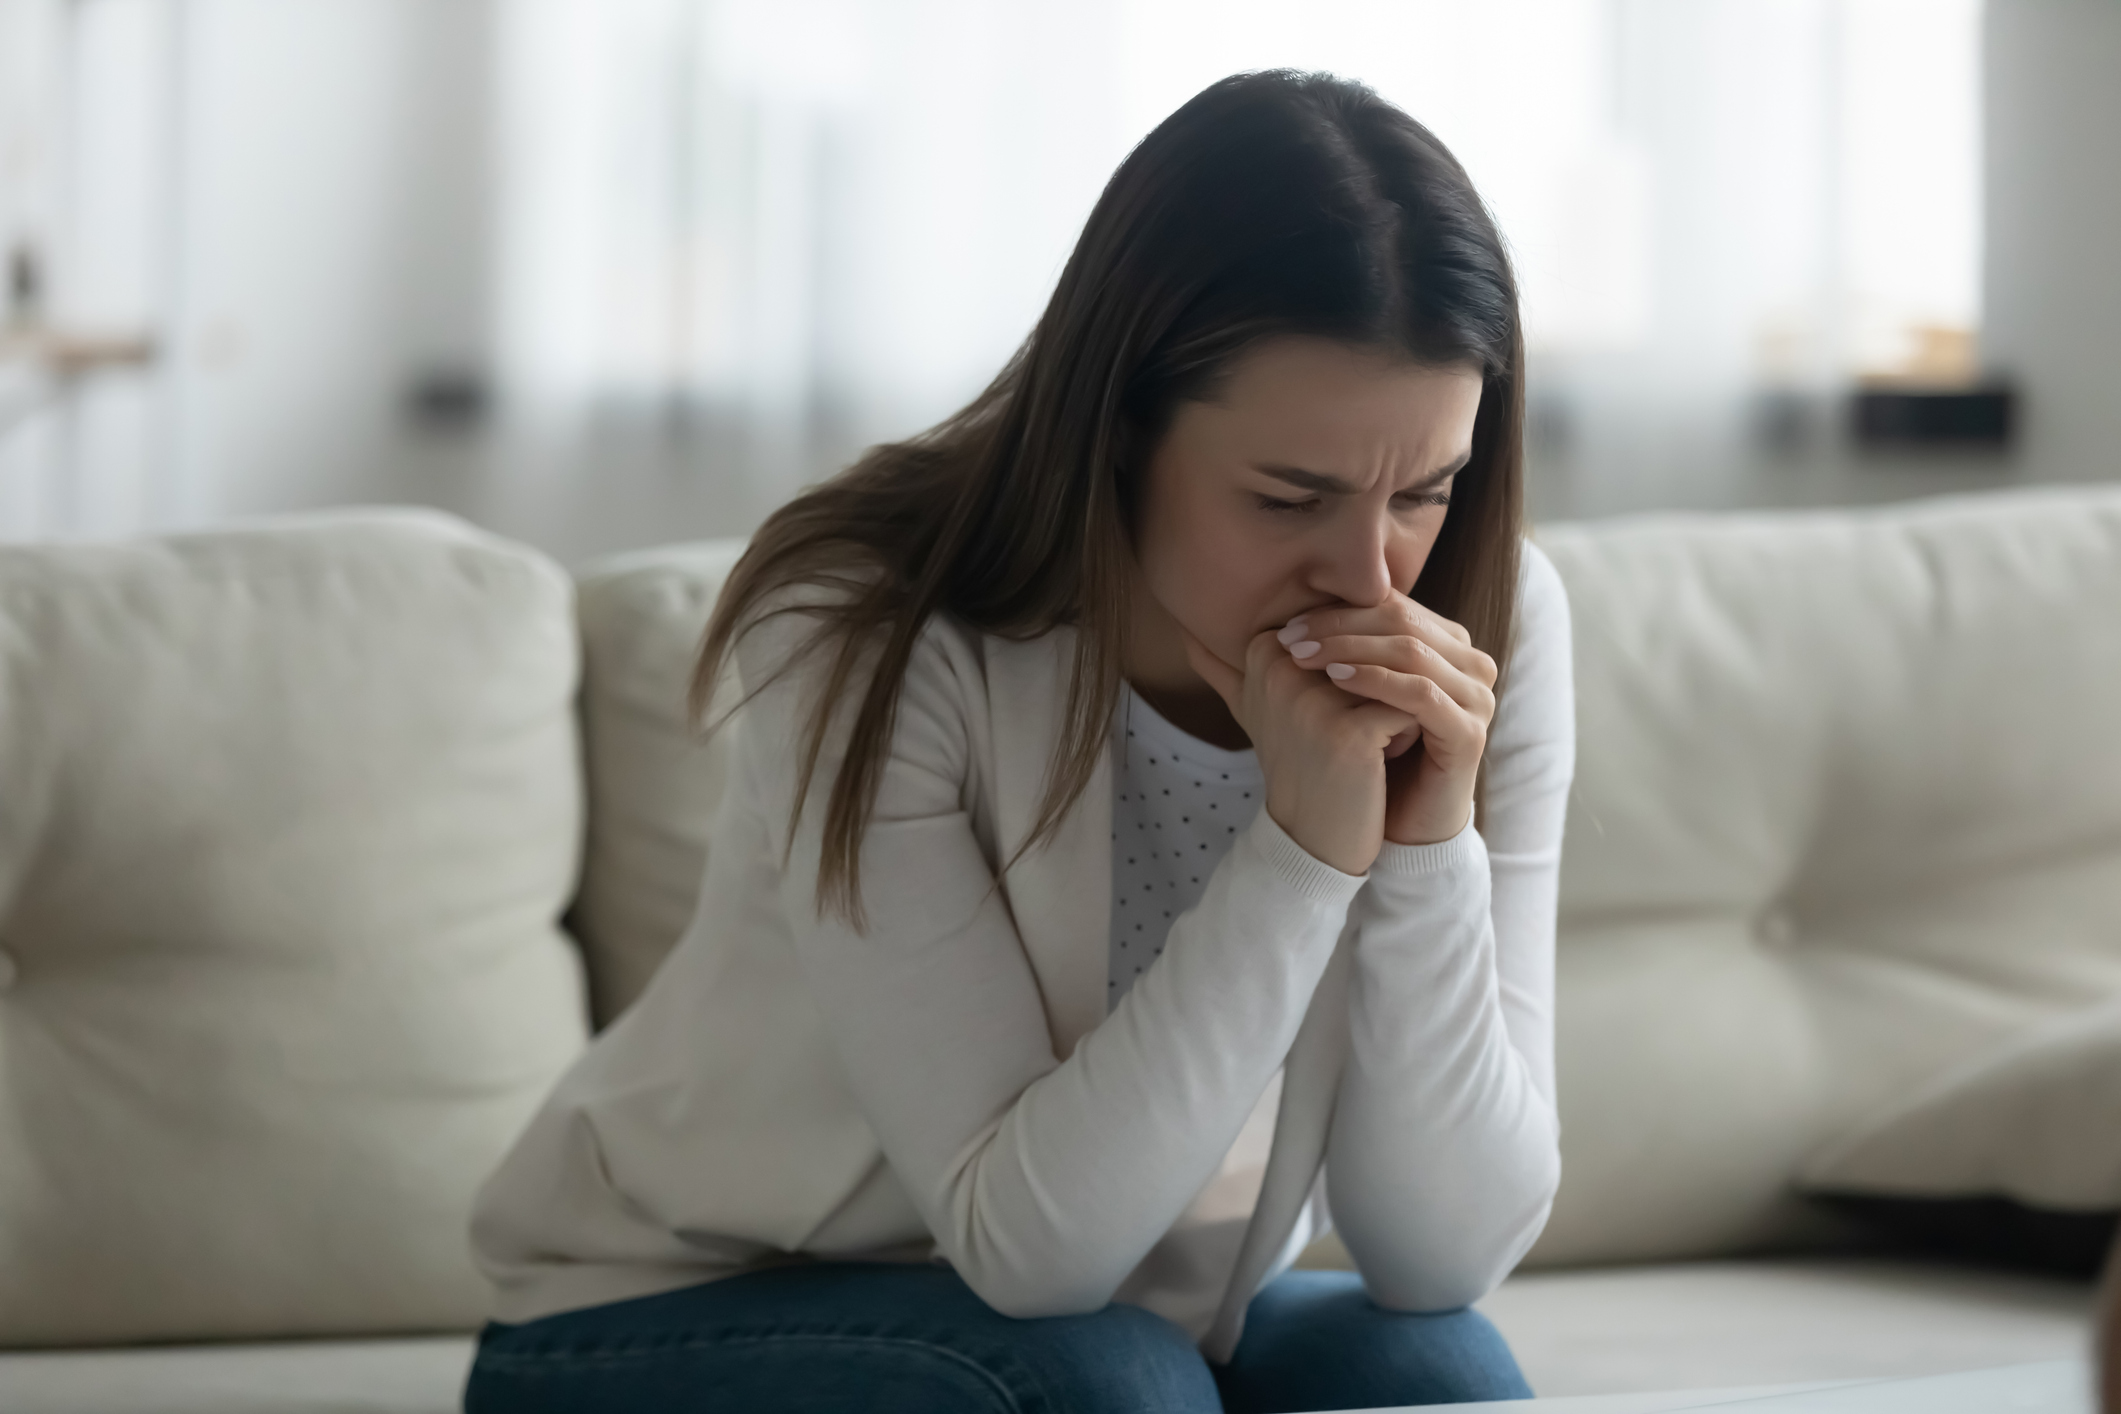 Woman goes through divorce sitting on couch crying feels depressed